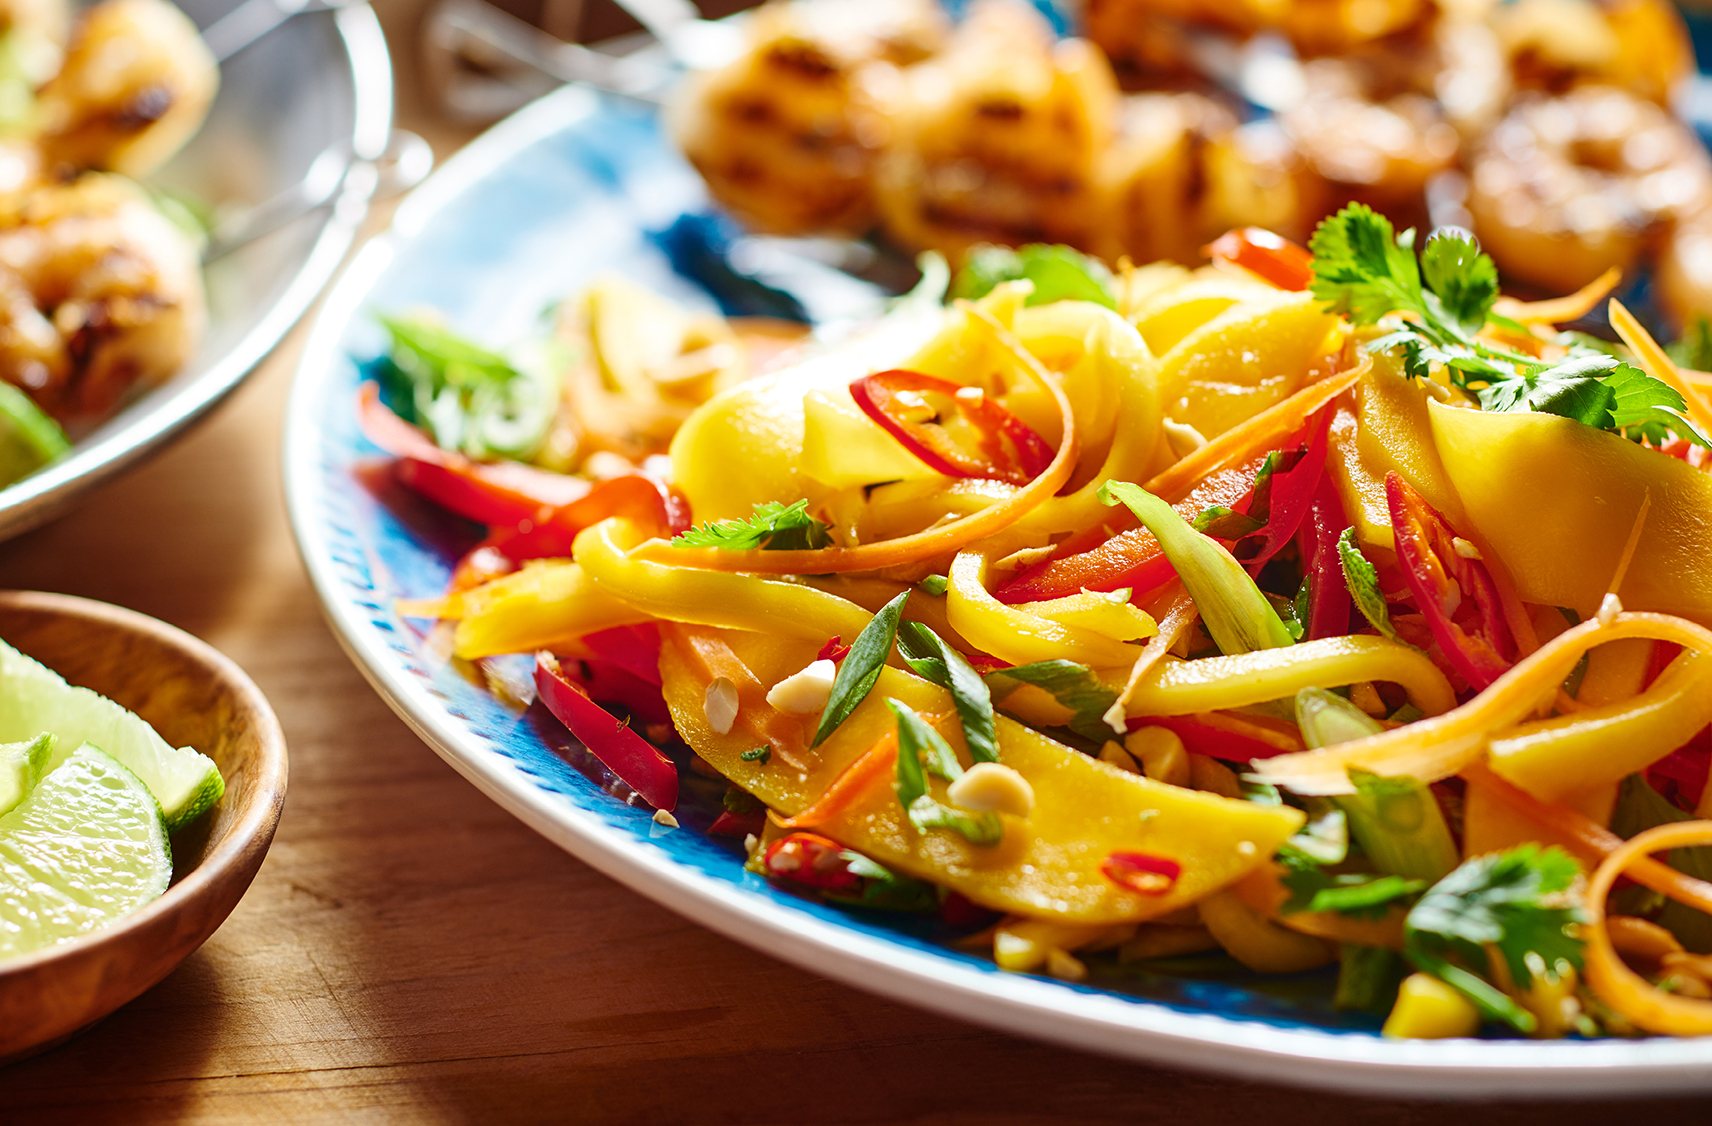 A plate of thai mango salad and shrimp skewers on a wooden table
